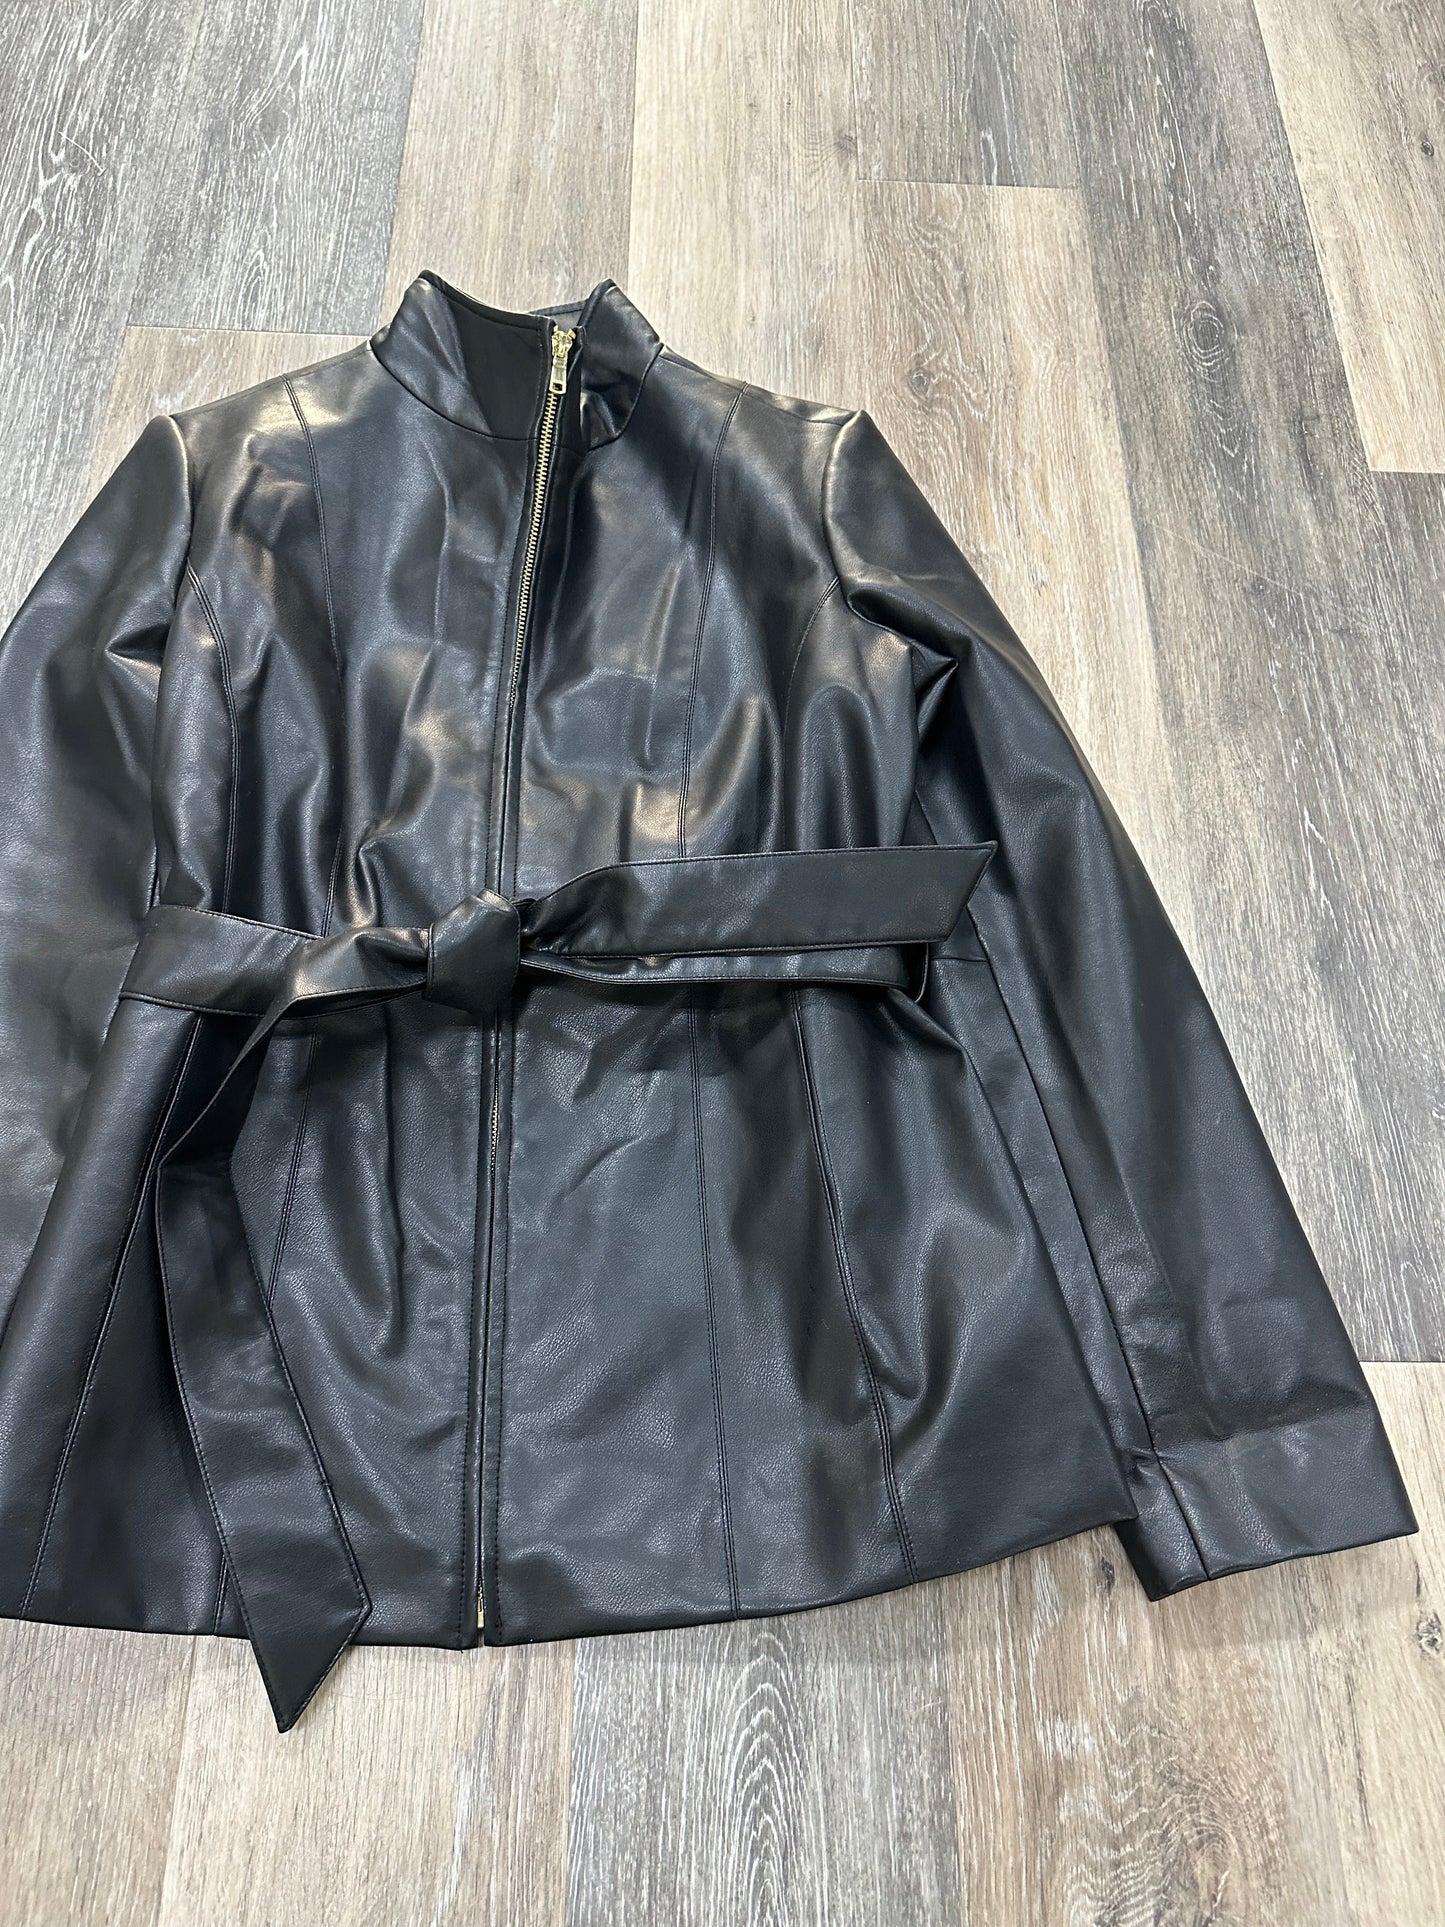 Jacket Leather By Cole-haan  Size: M